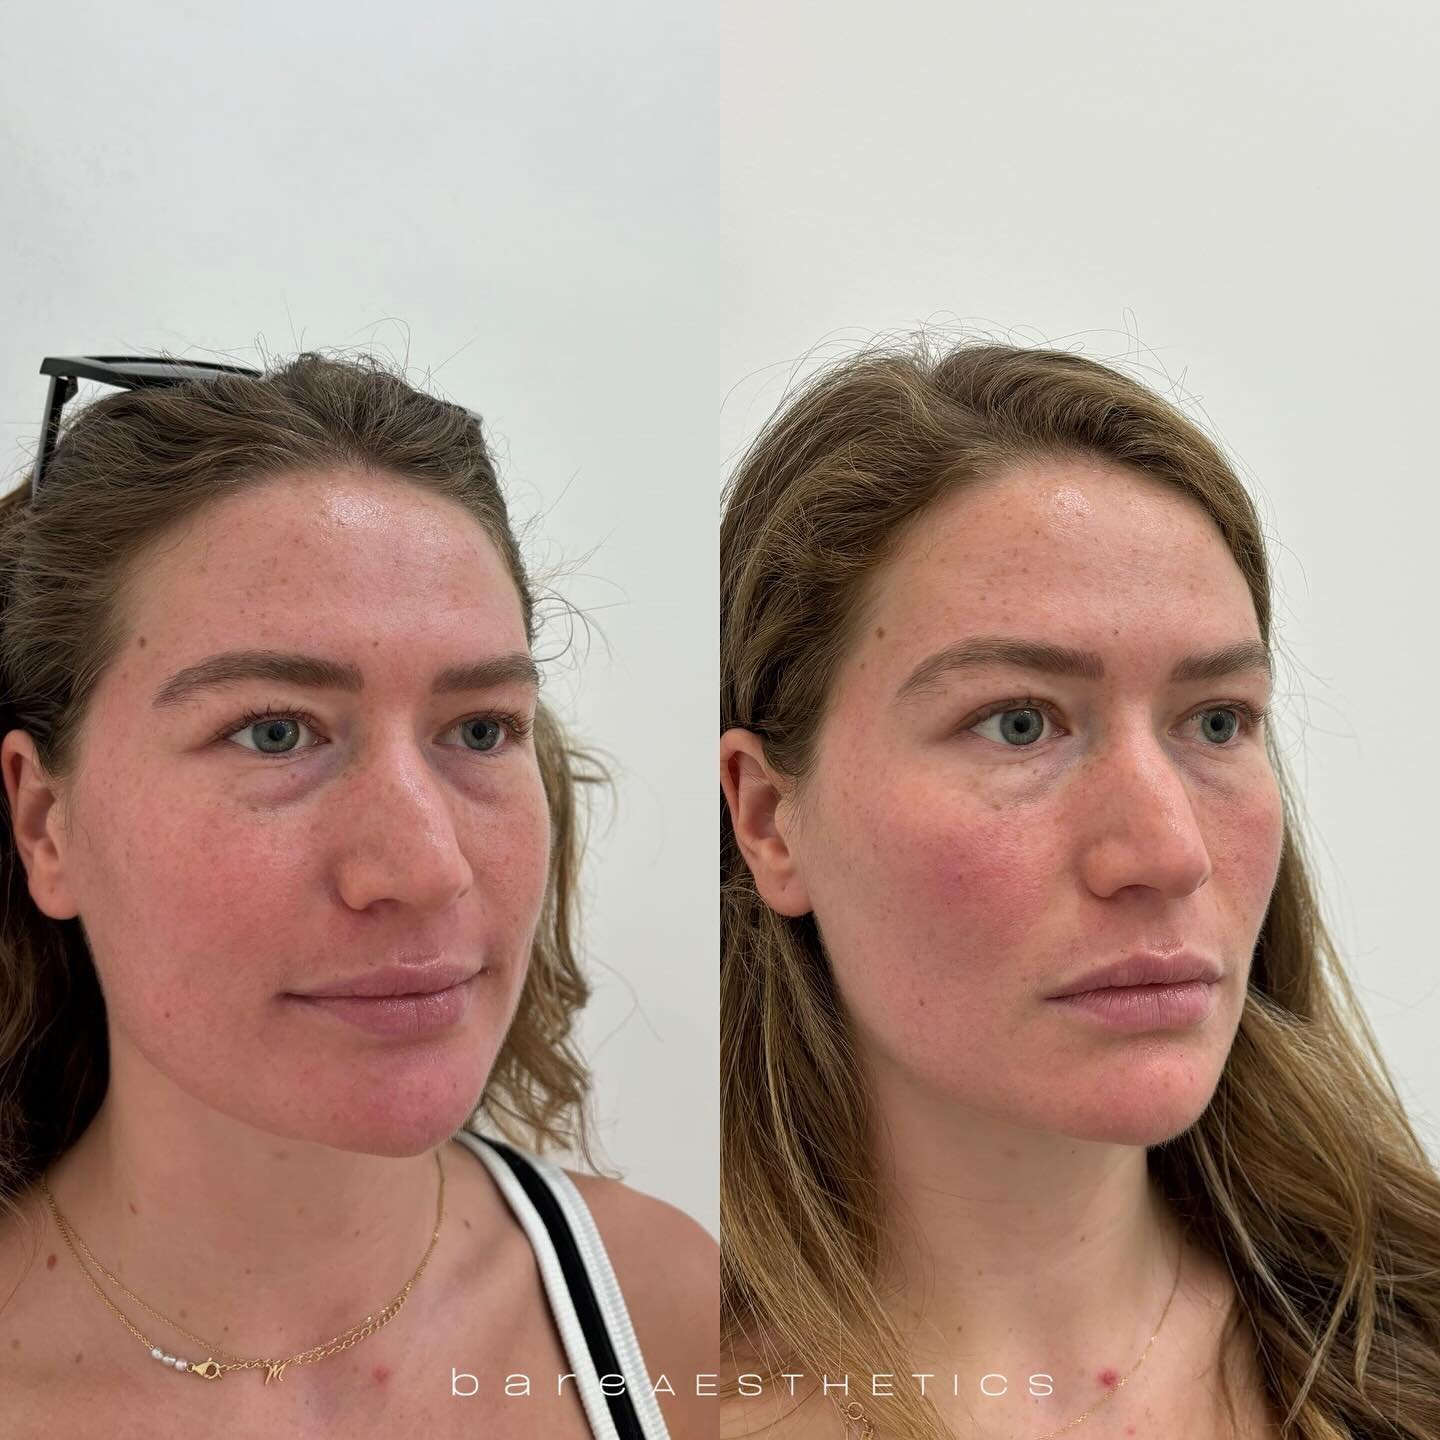 Consultation for skin health, under-eye and volume loss concerns available with AHPRA Registered Nurse Suki. 

Thank you my beautiful client for allowing me to share❤️

Bare Aesthetics&trade; 
Bareaestheticsau.com

𝘋𝘪𝘴𝘤𝘭𝘢𝘪𝘮𝘦𝘳: 𝘋𝘶𝘦 𝘵𝘰 ?